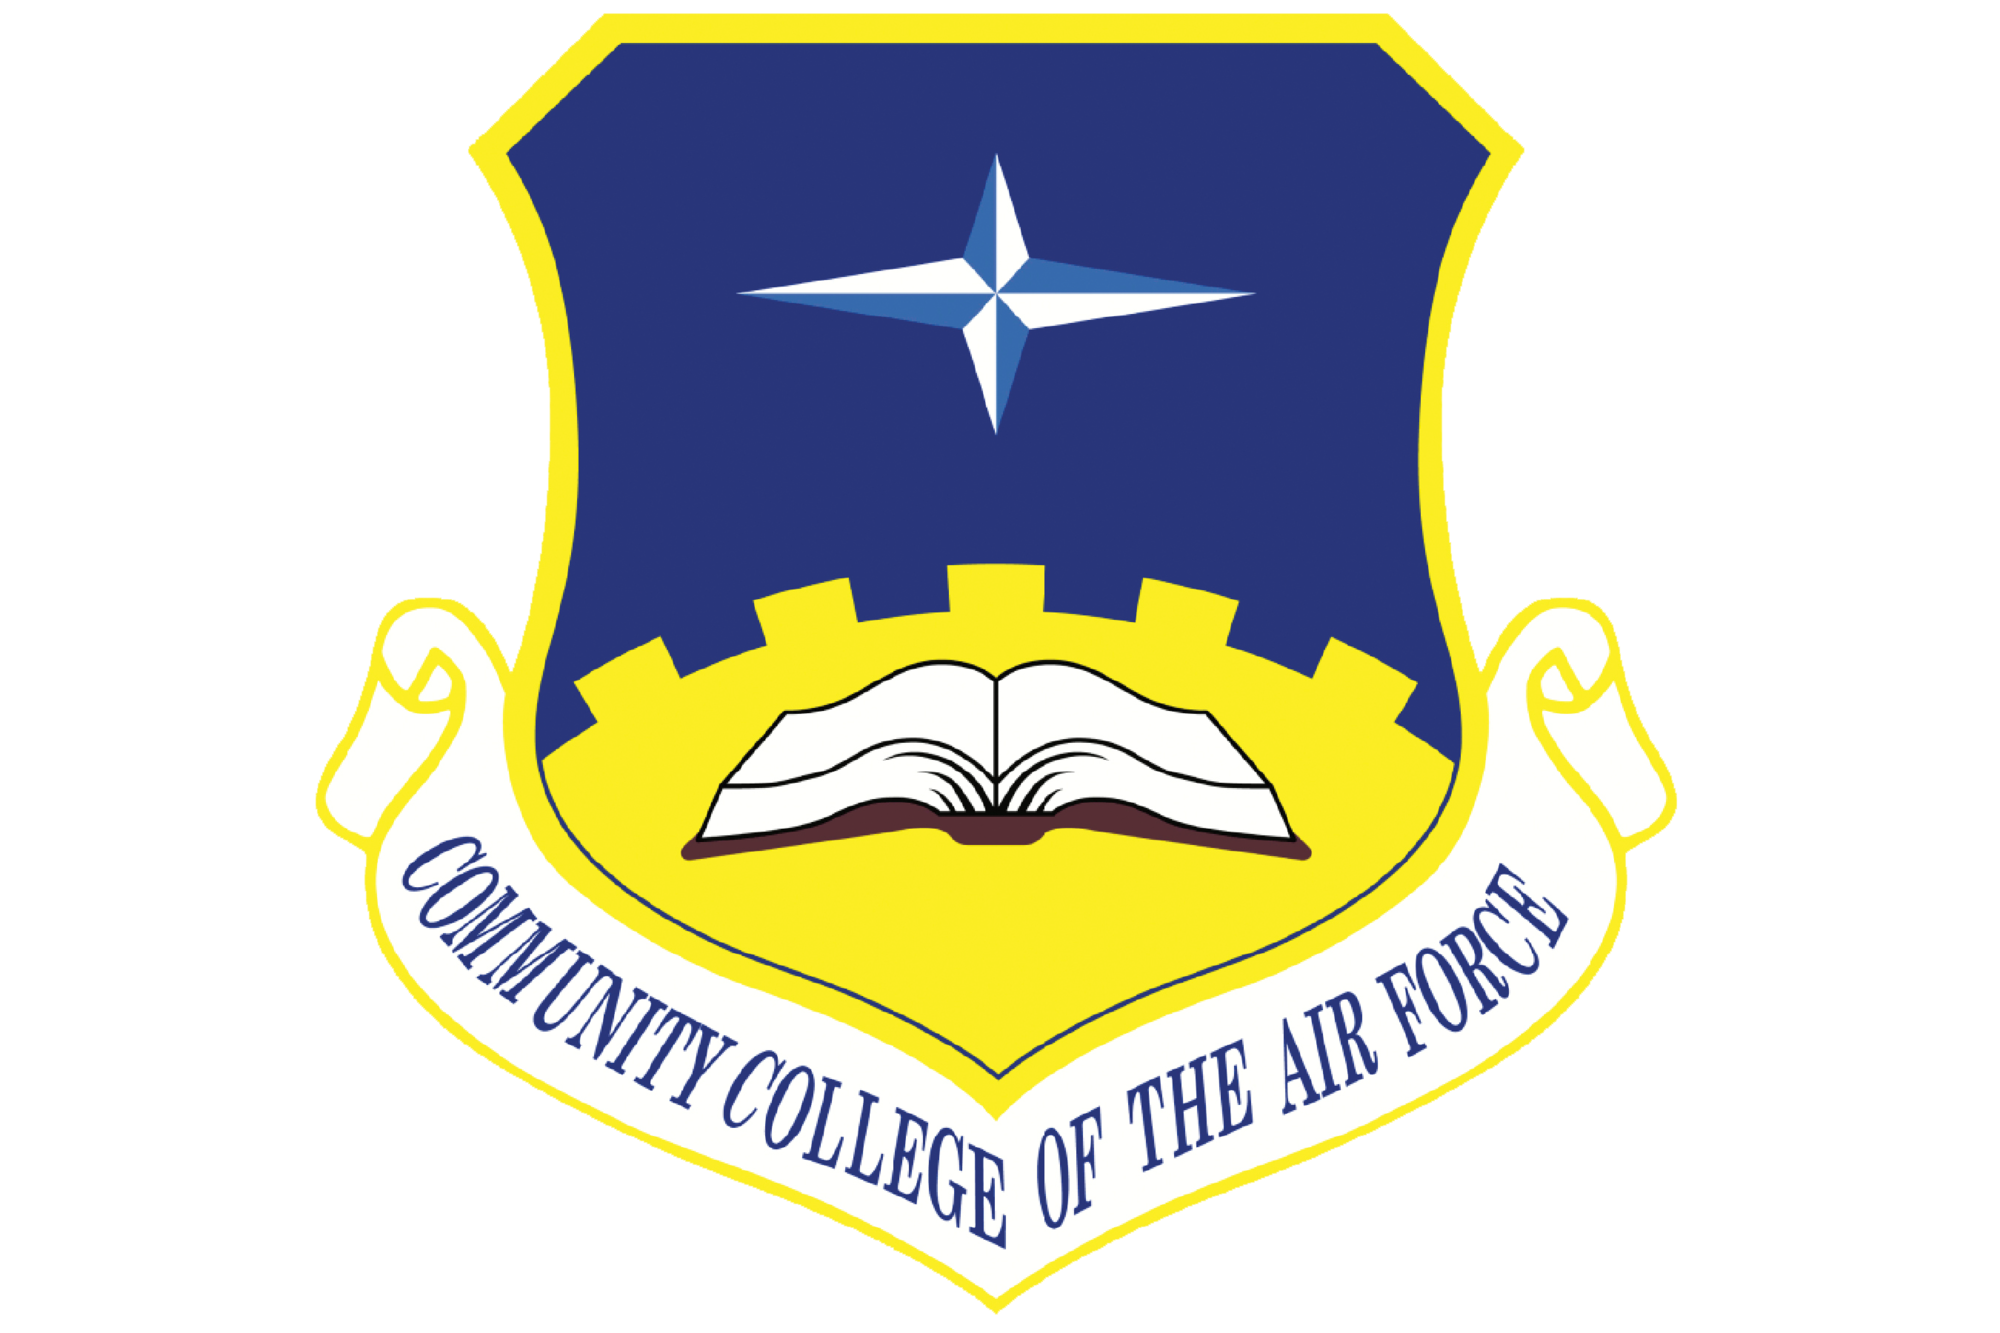 34 Airmen from the 514th Air Mobility Wing received degrees from the Community College of the Air Force here on April 26.